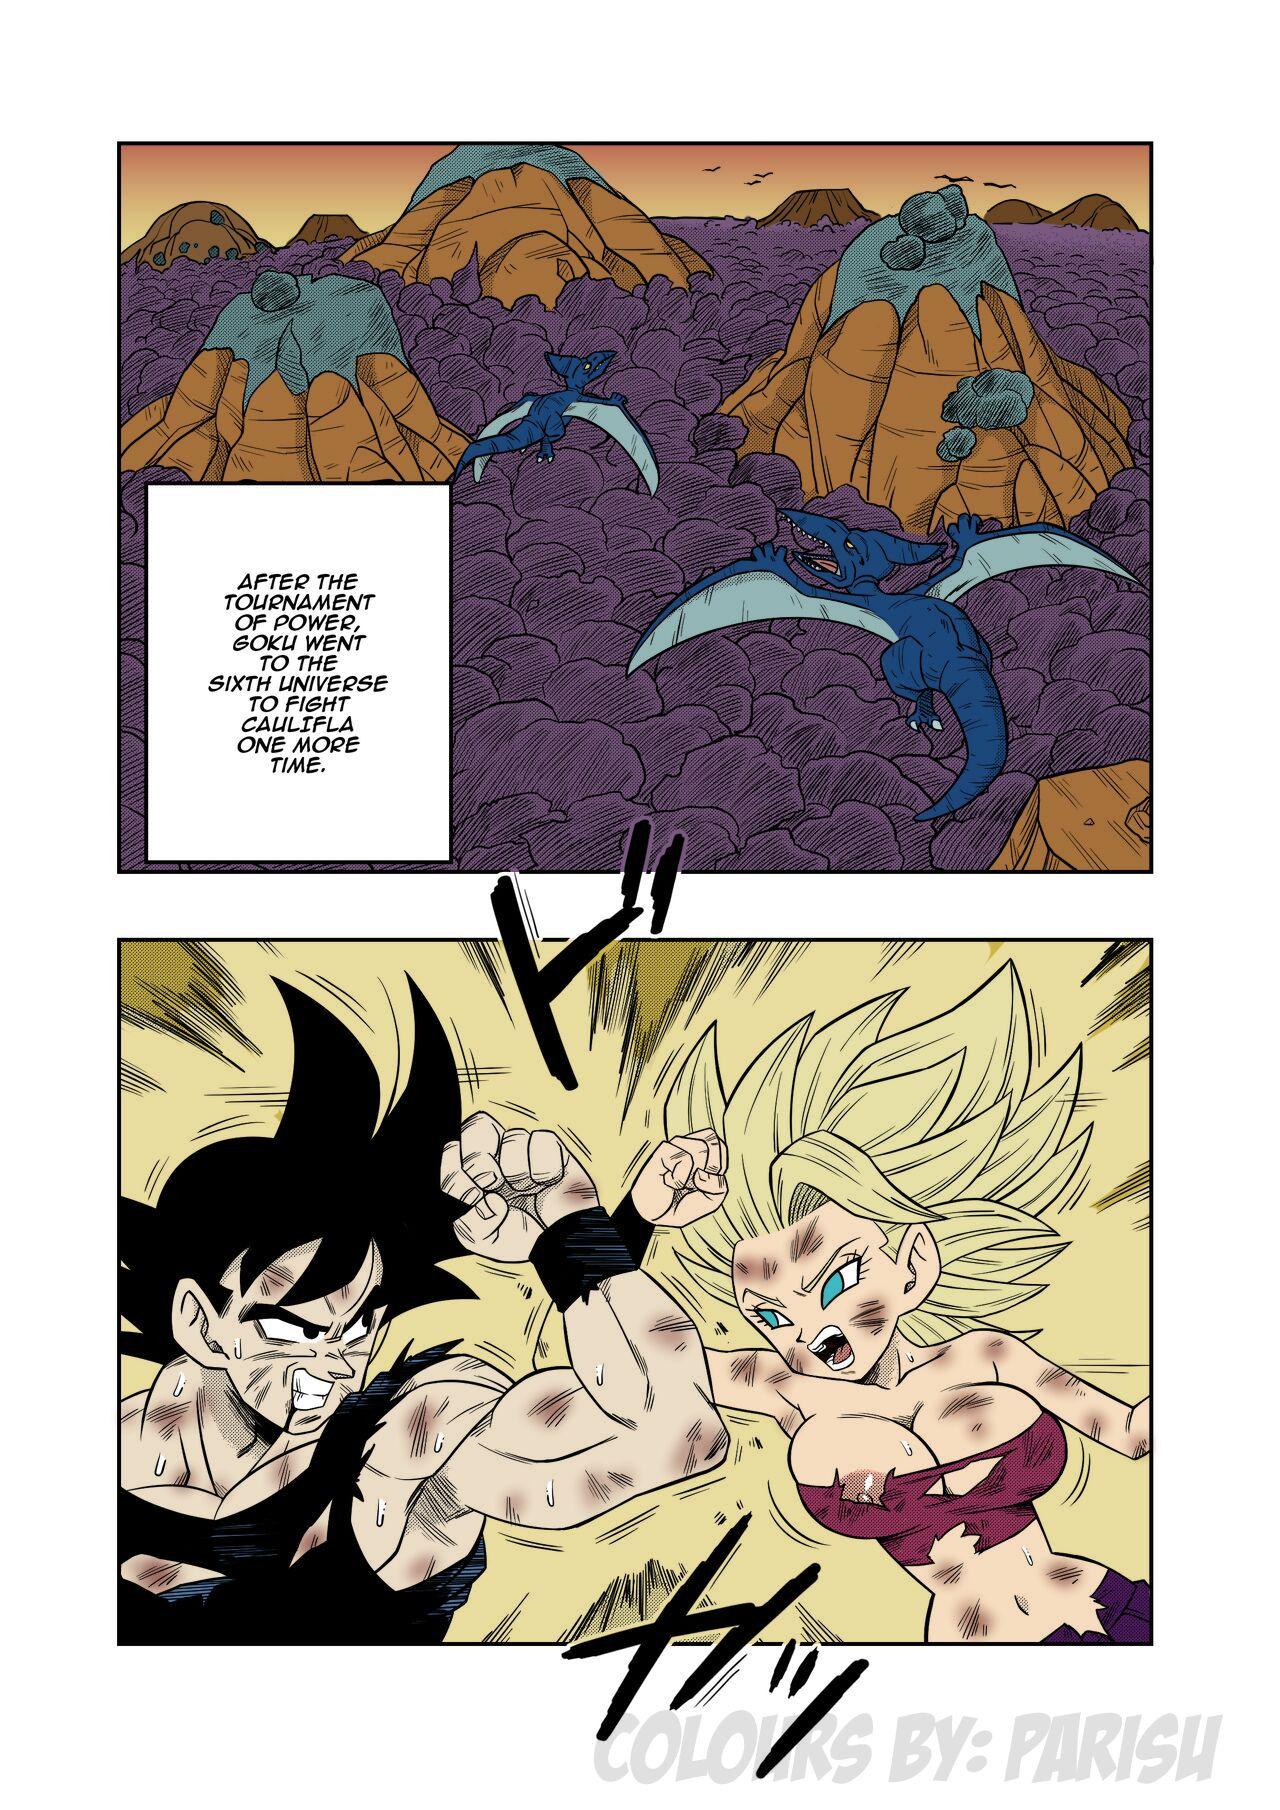 Tinder Fight in the 6th Universe!!! - Dragon ball Dragon ball super Blond - Page 3